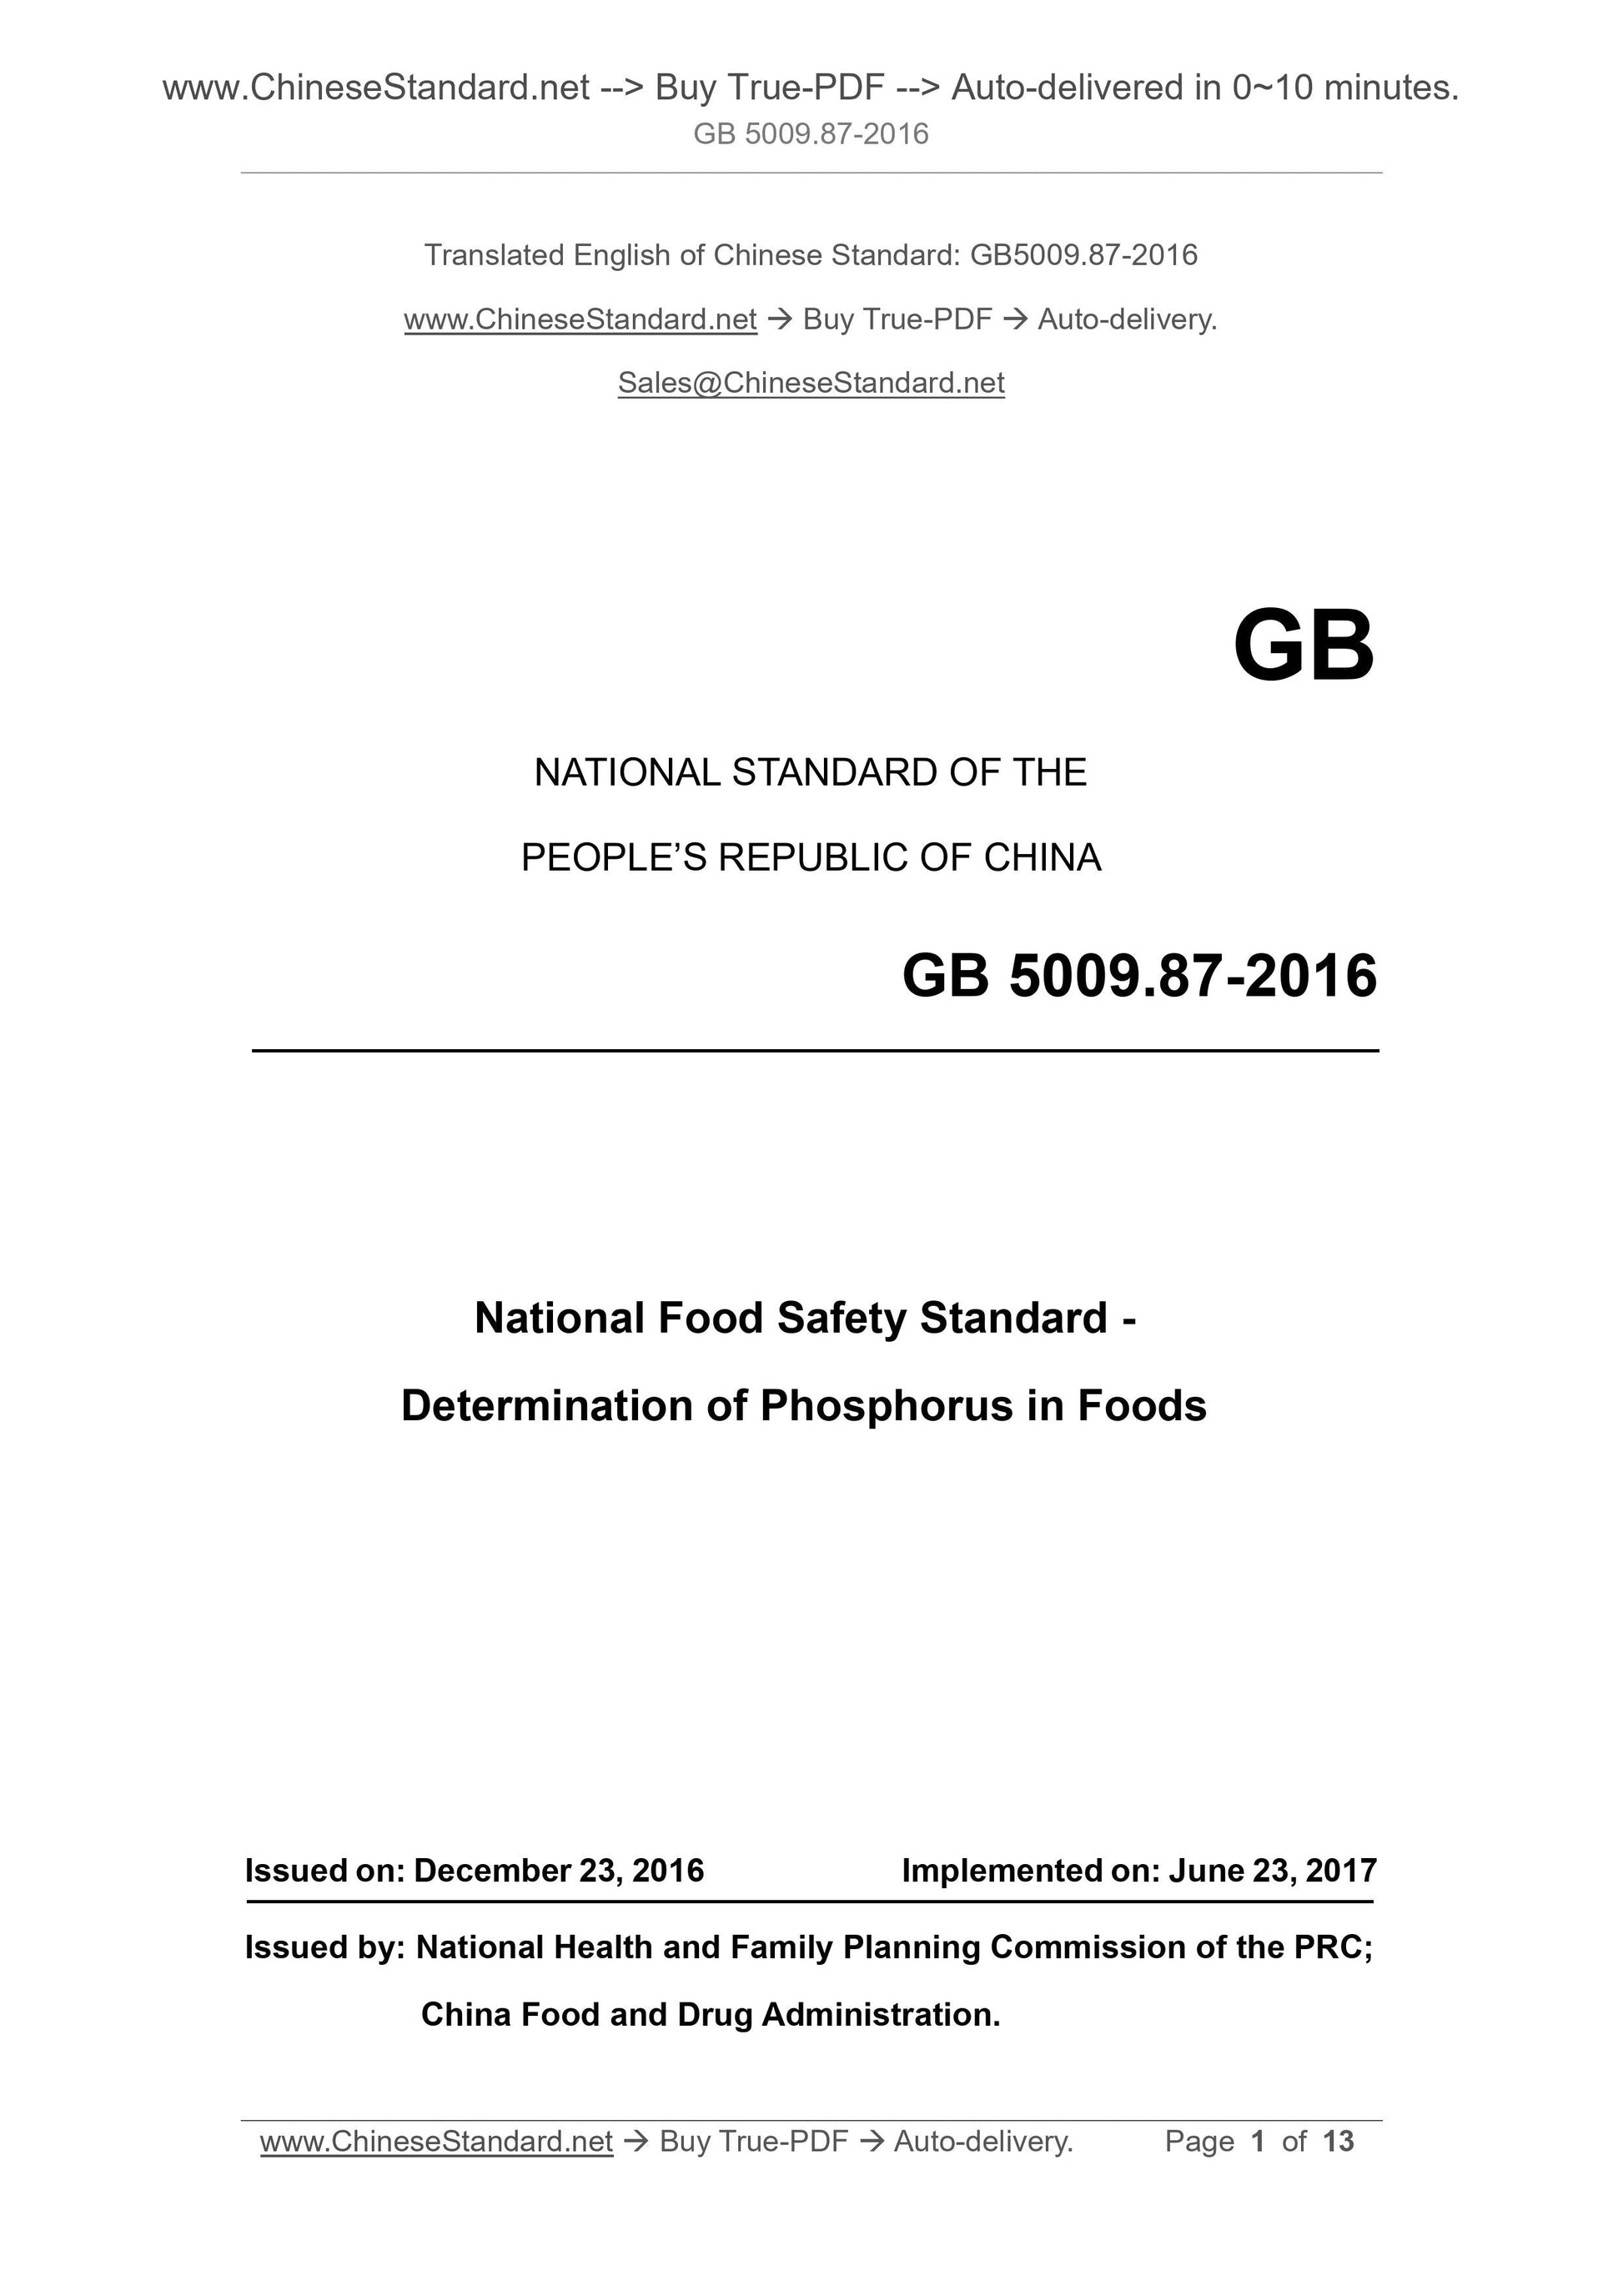 GB 5009.87-2016 Page 1